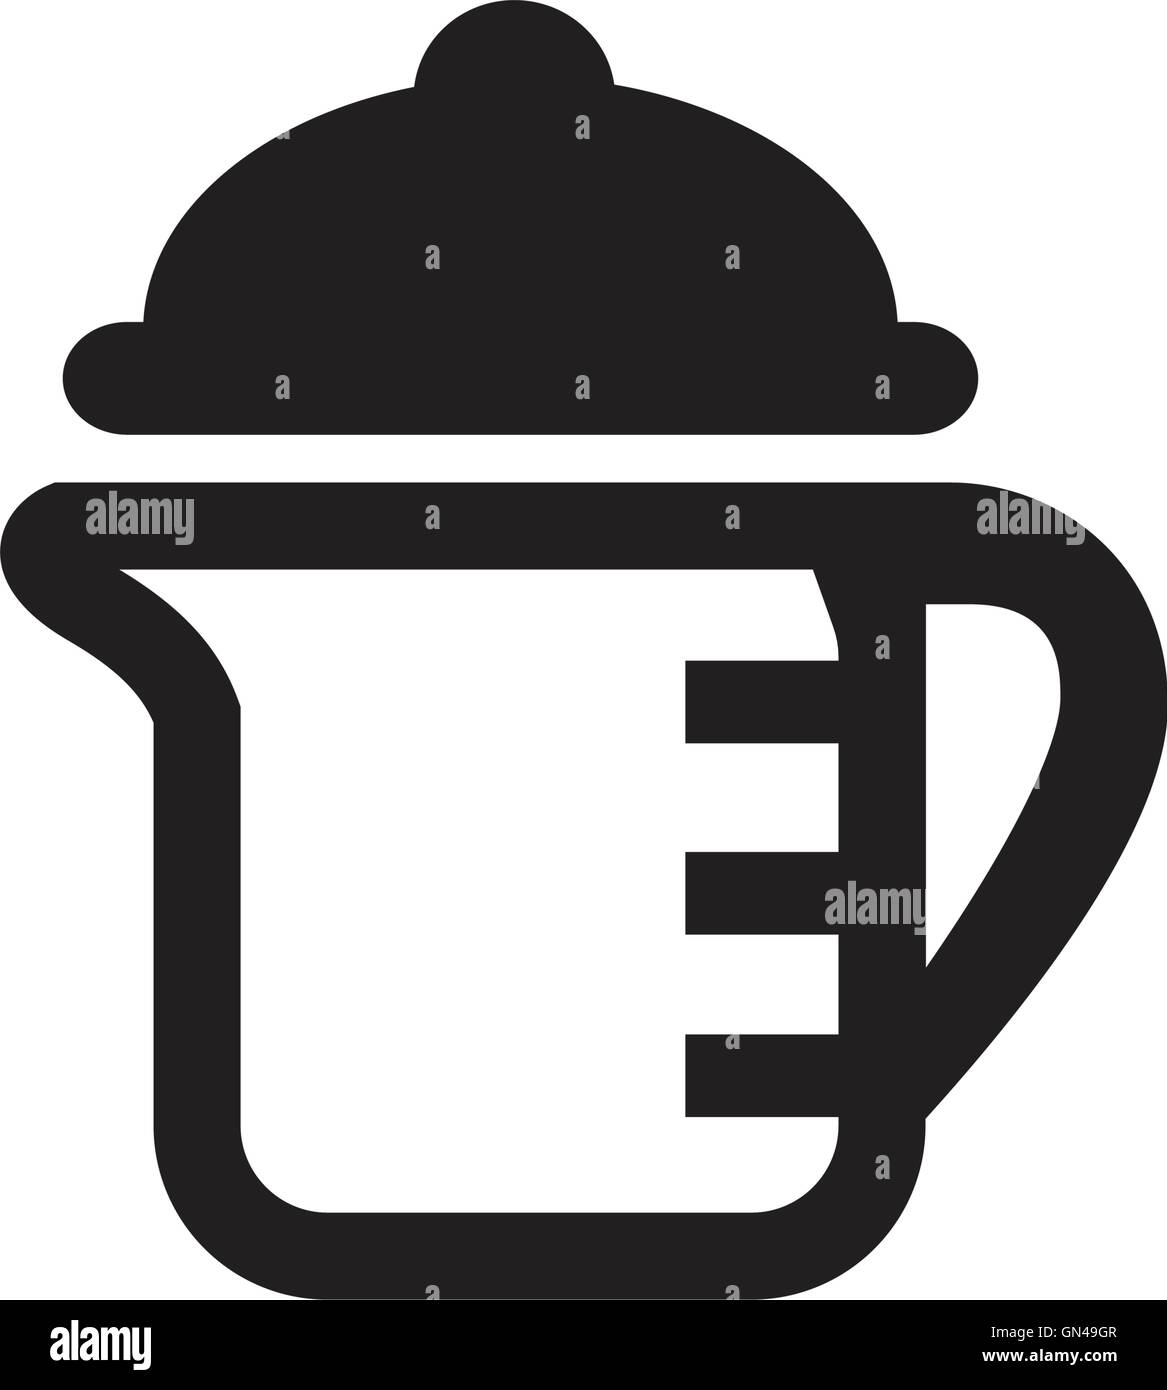 Chemical Measuring Cup Icon Graphic by samagata · Creative Fabrica